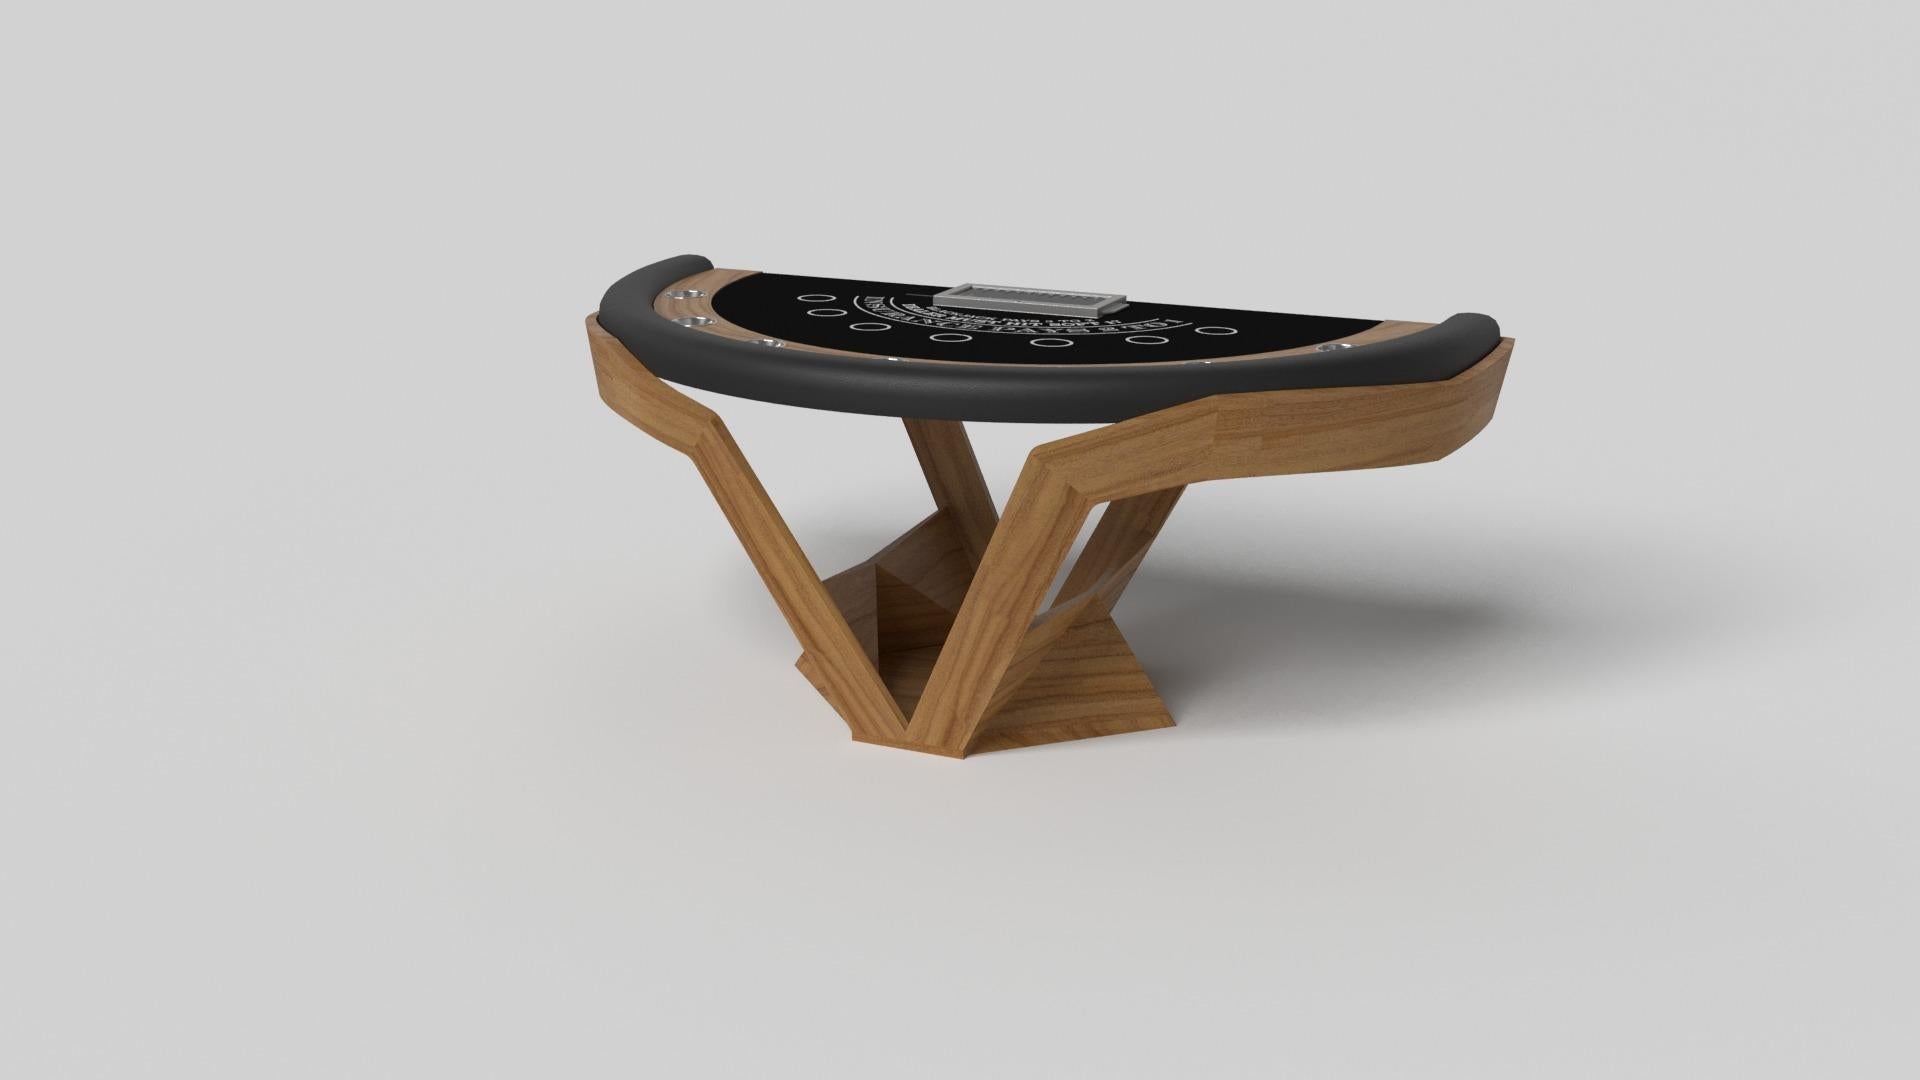 The Enzo craps table is Inspired by the aerodynamic angles of top-of-the-line European vehicles. Designed with sleek, V-shaped lines and a thoughtful use of negative space, this table boasts an energetic sense of spirit while epitomizing the look of